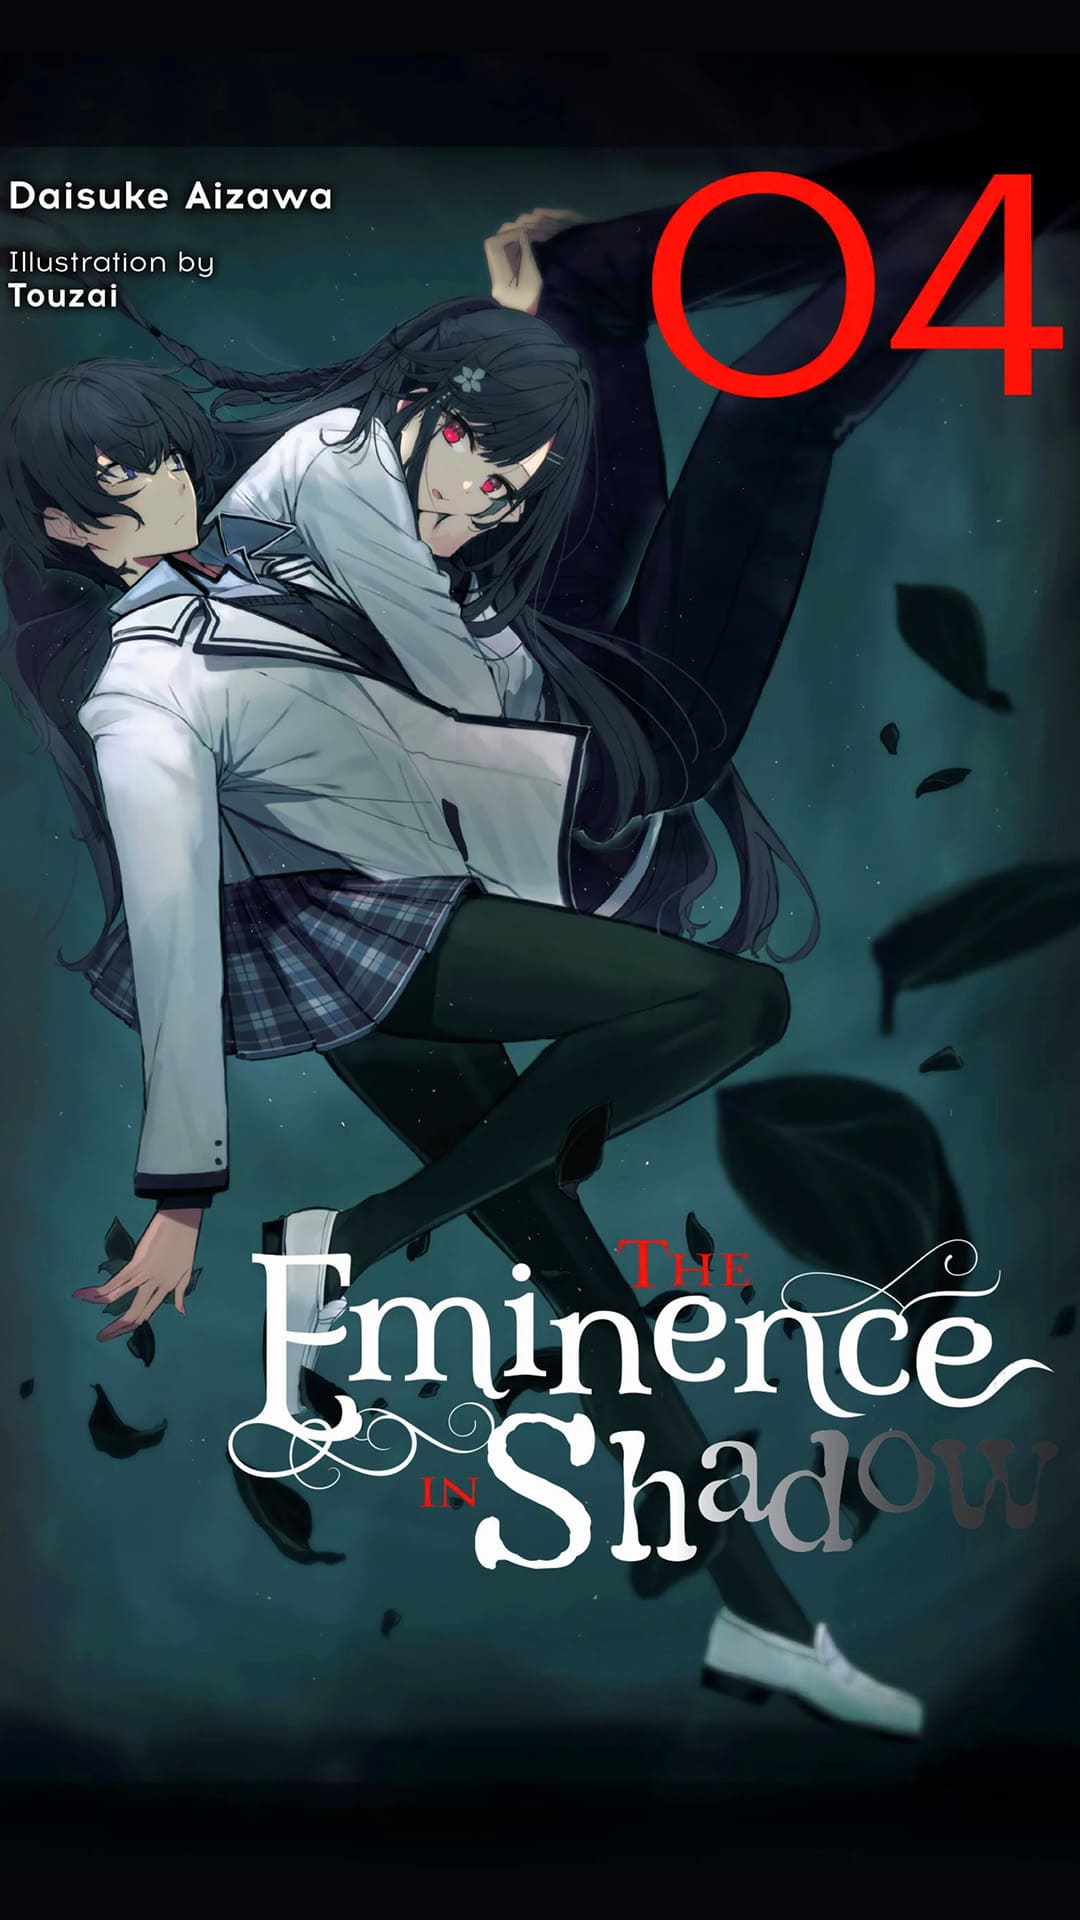 The Eminence in Shadow Wallpapers